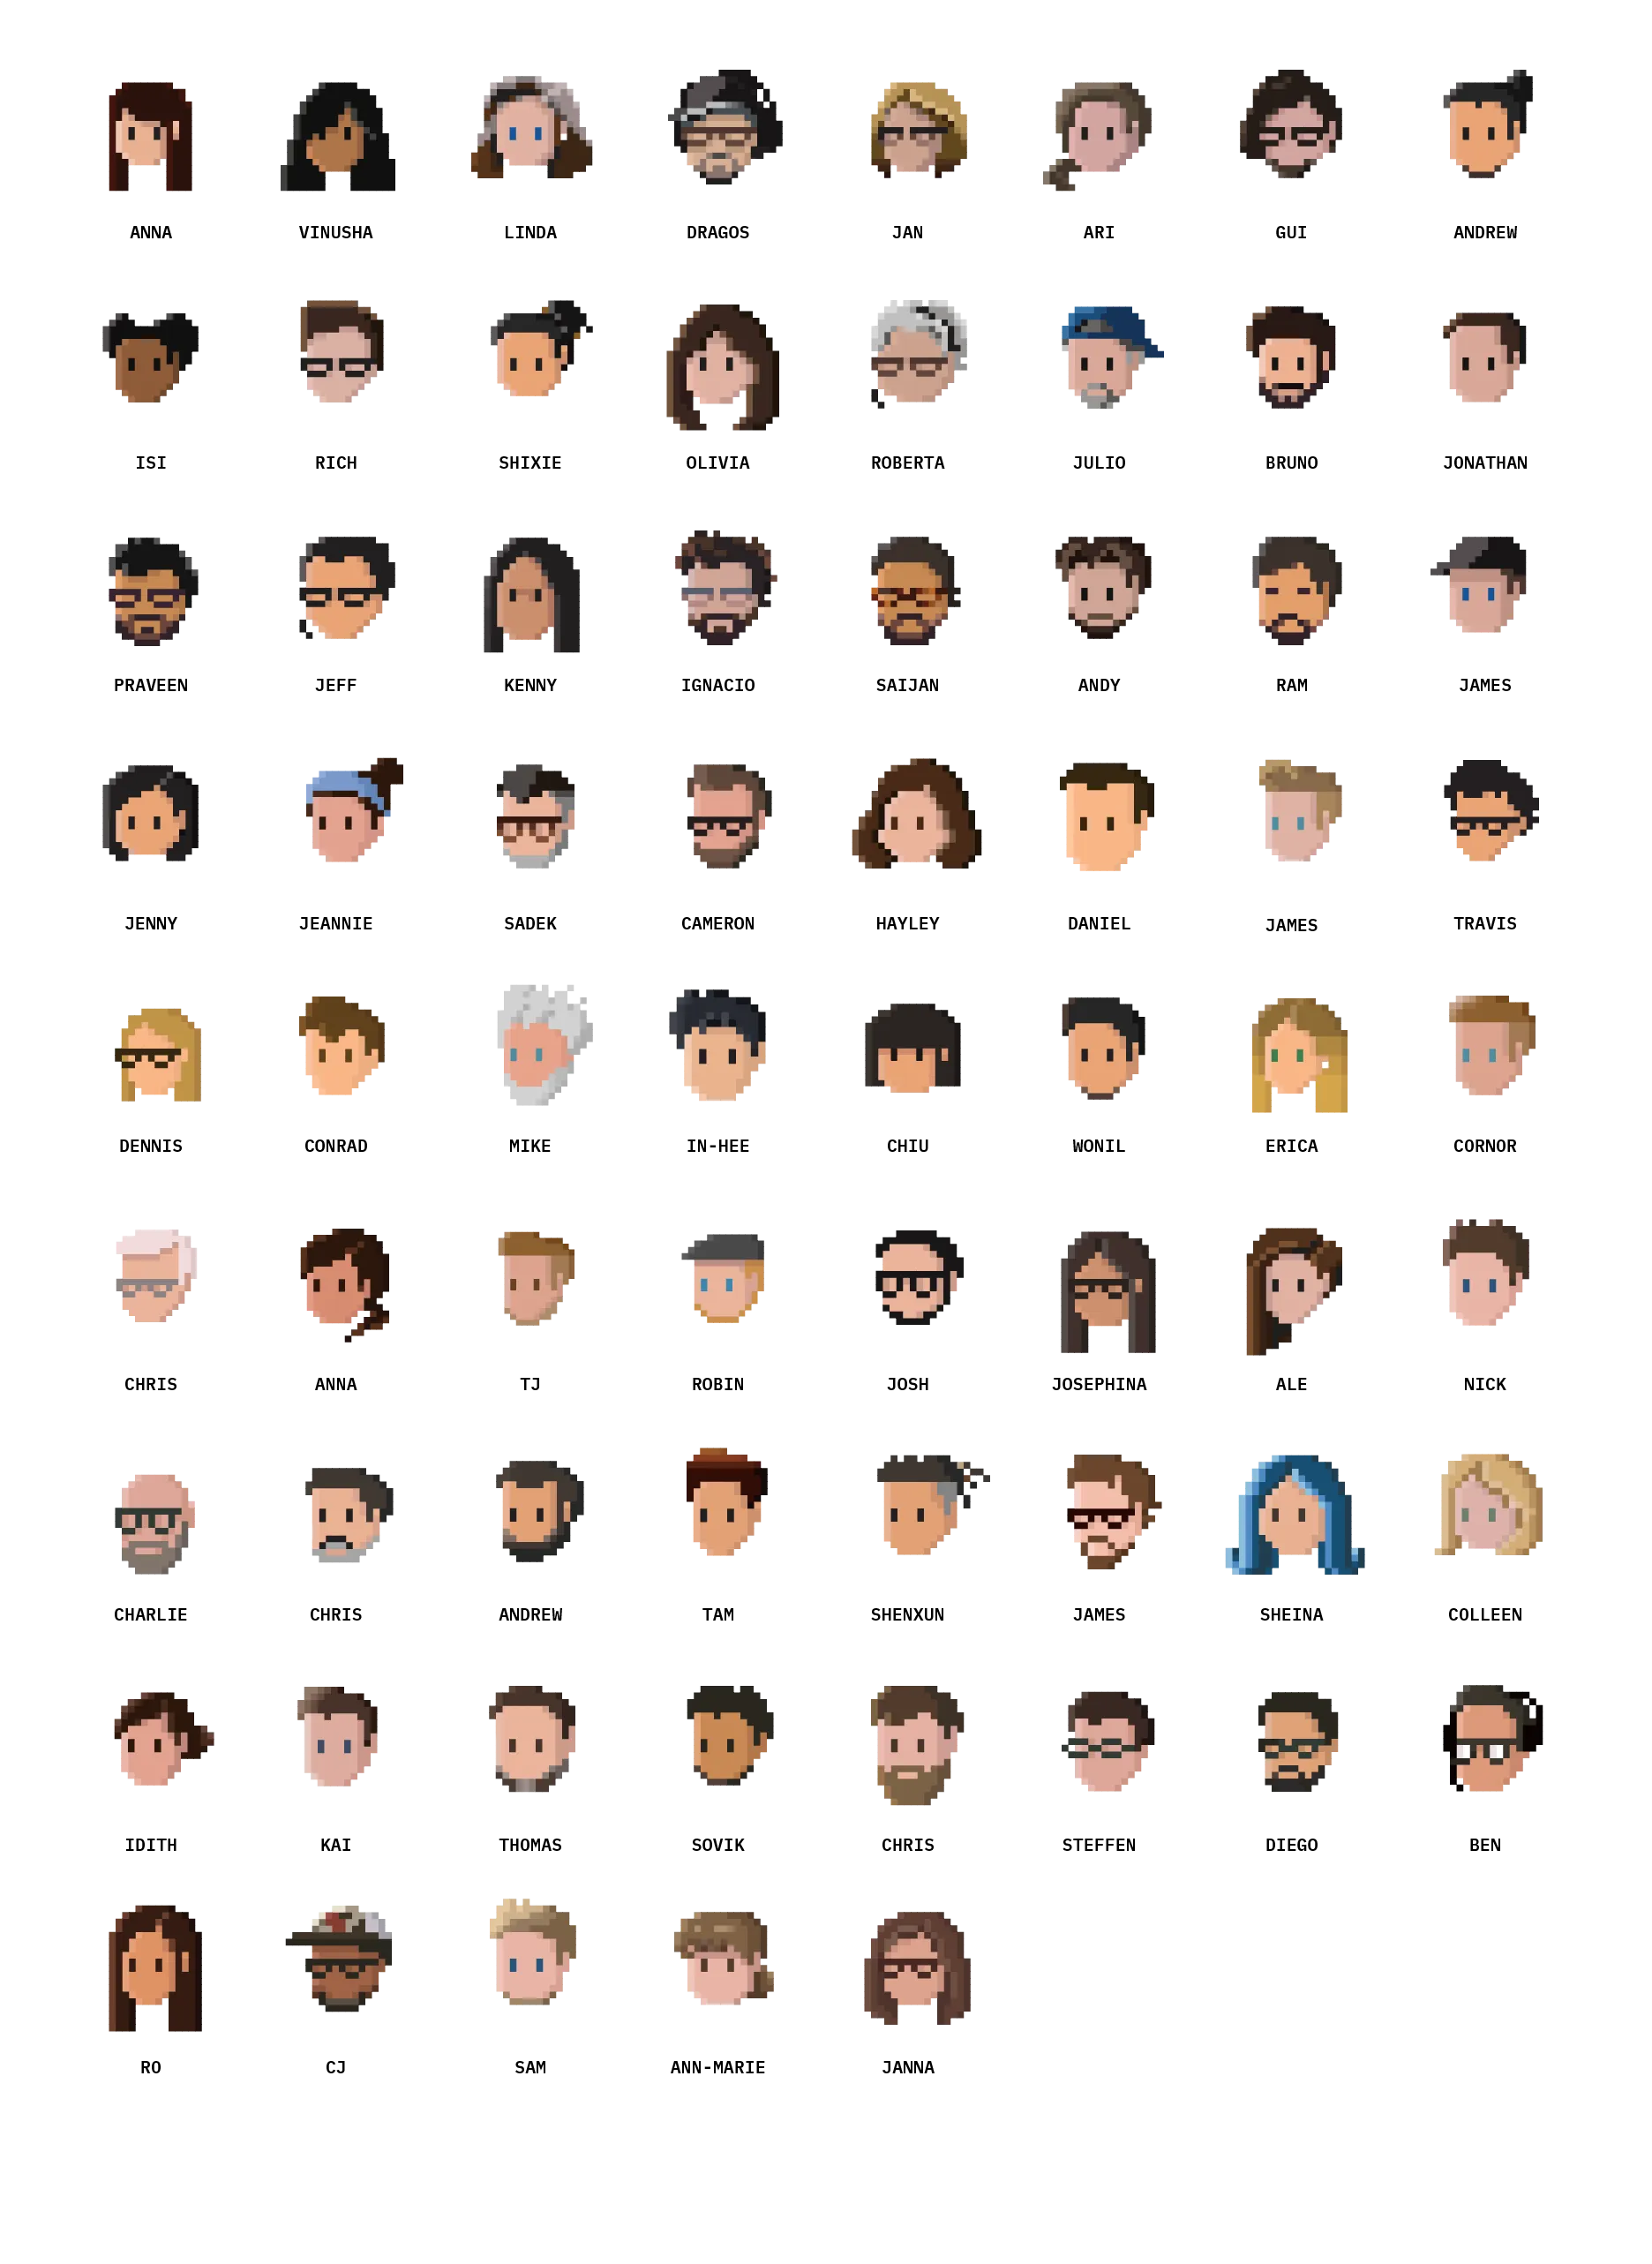 Grid view of all pixel portraits I've done over the years